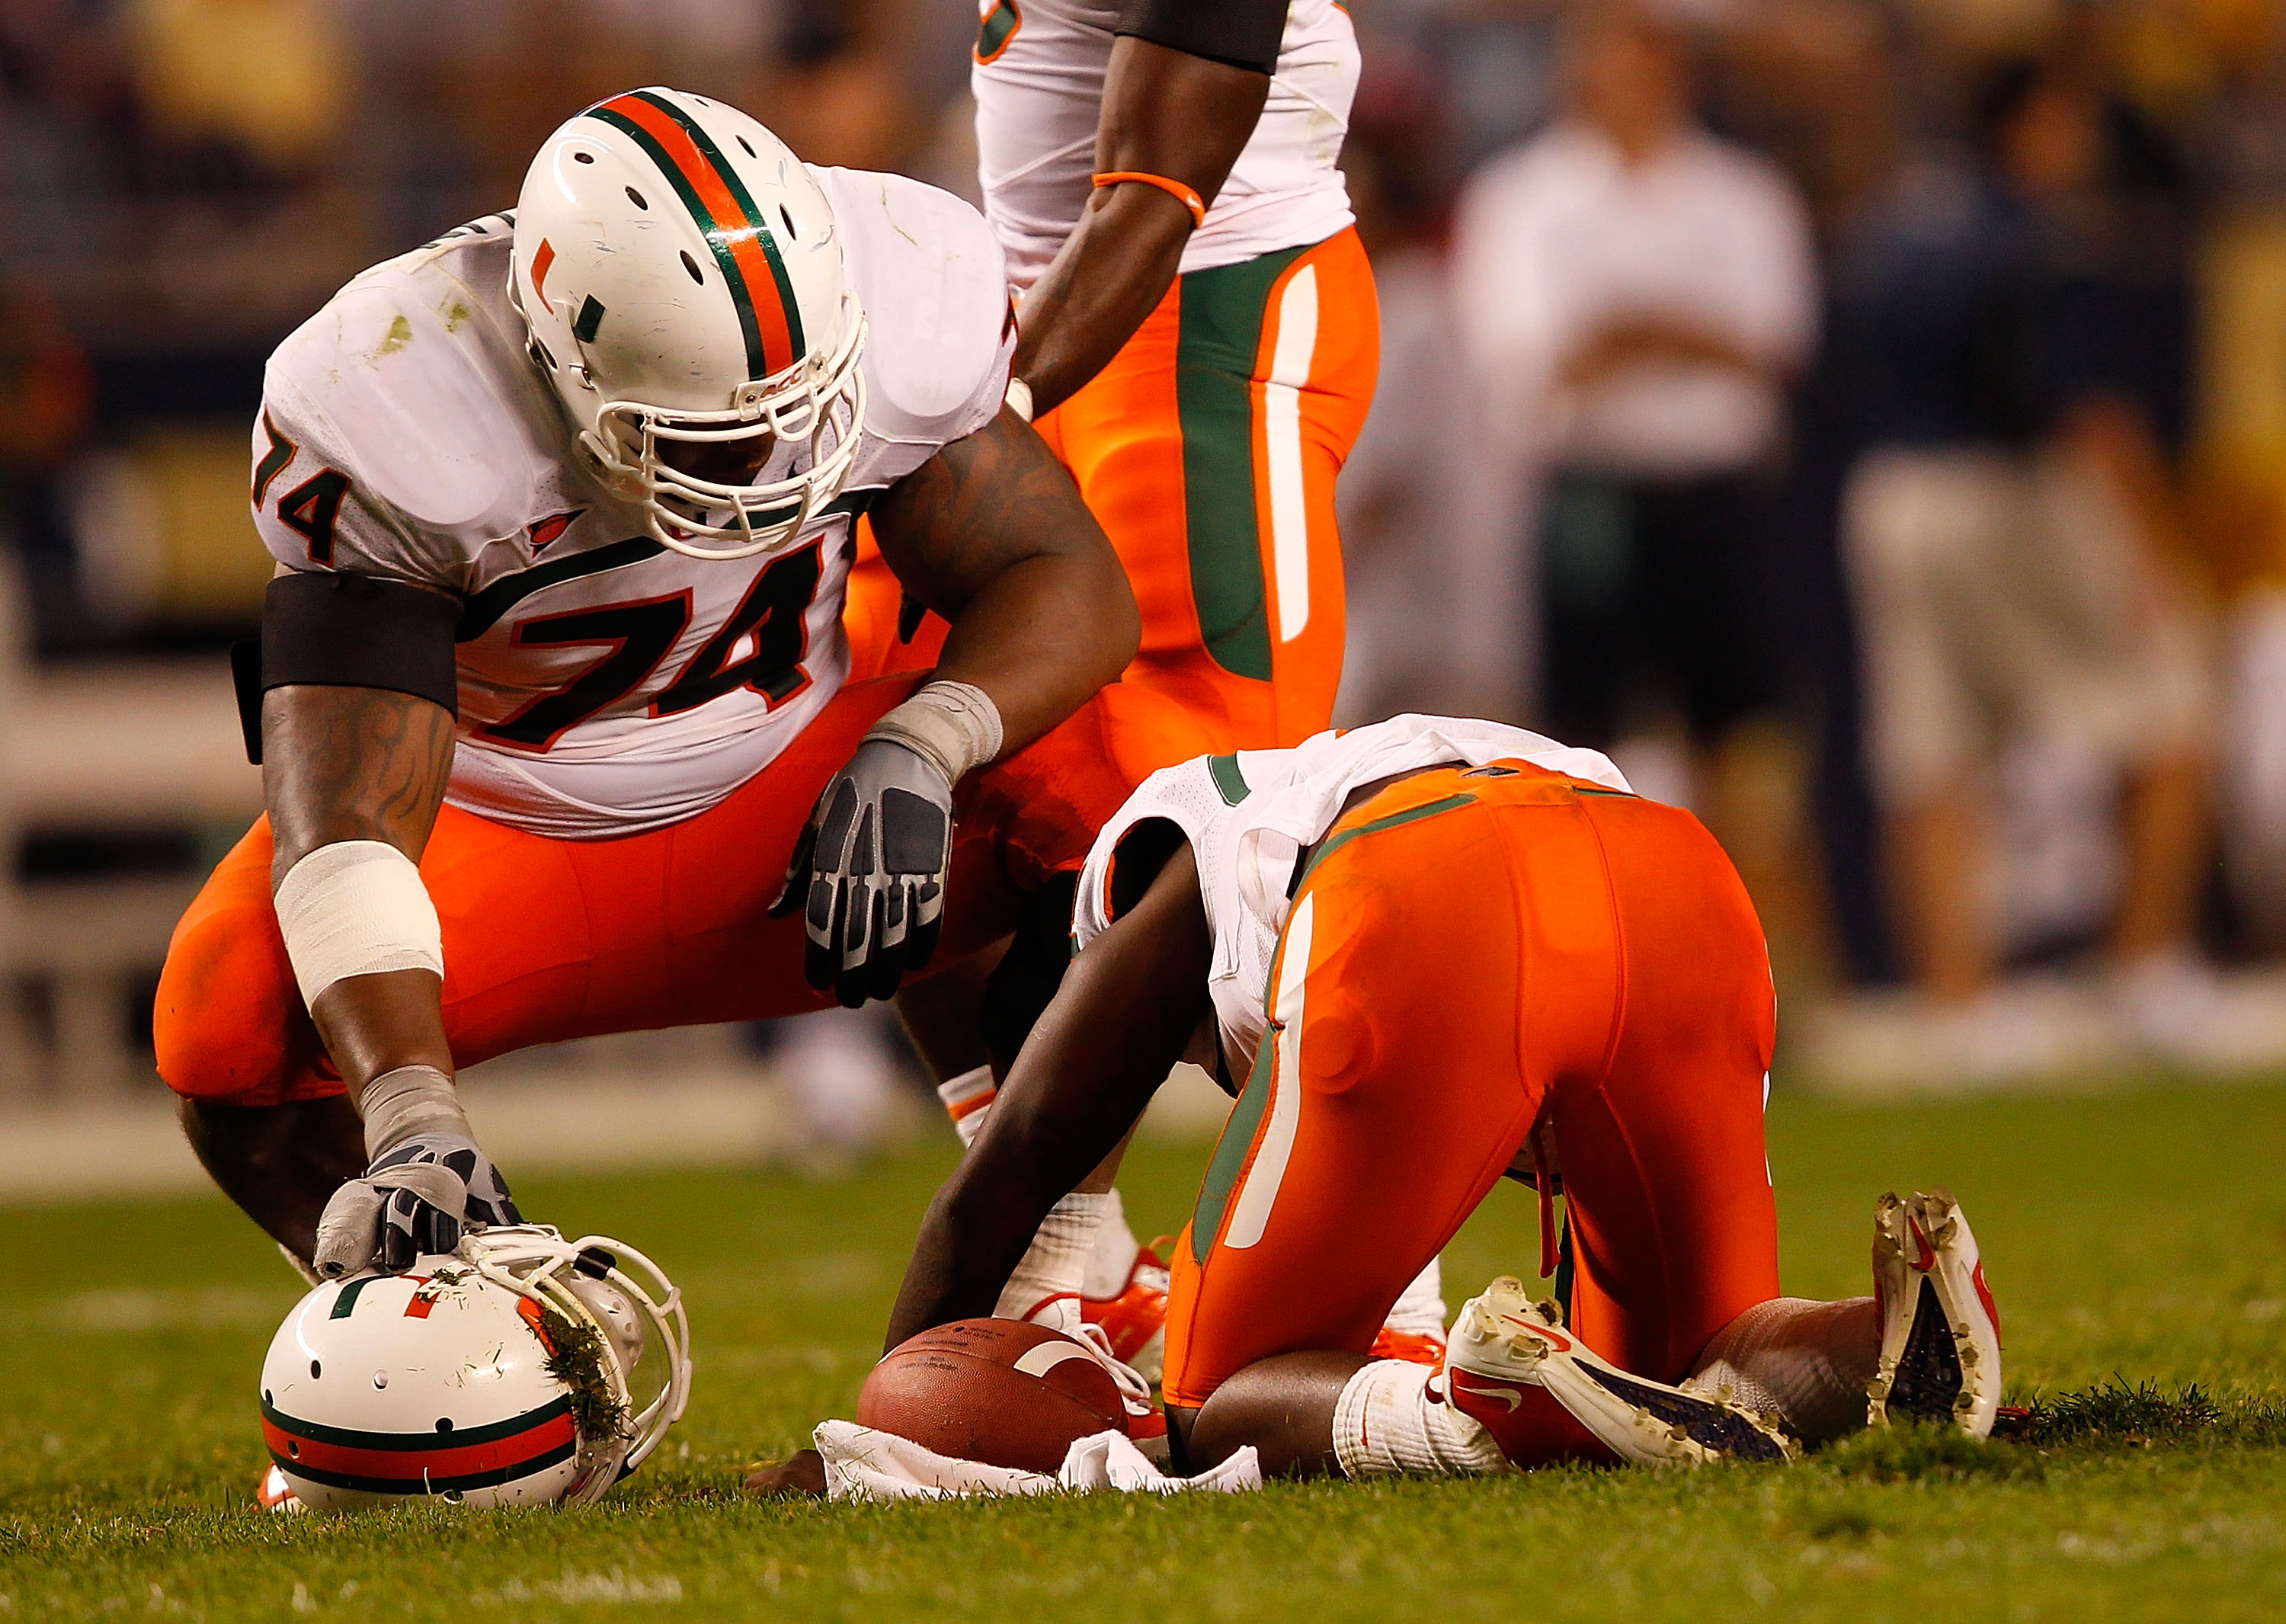 PITTSBURGH - SEPTEMBER 23:  Jacory Harris #12 of the Miami Hurricanes lays on the ground as teammate Orlando Franklin #74 looks on after being sacked by the Pittsburgh Panthers on September 23, 2010 at Heinz Field in Pittsburgh, Pennsylvania.  (Photo by J